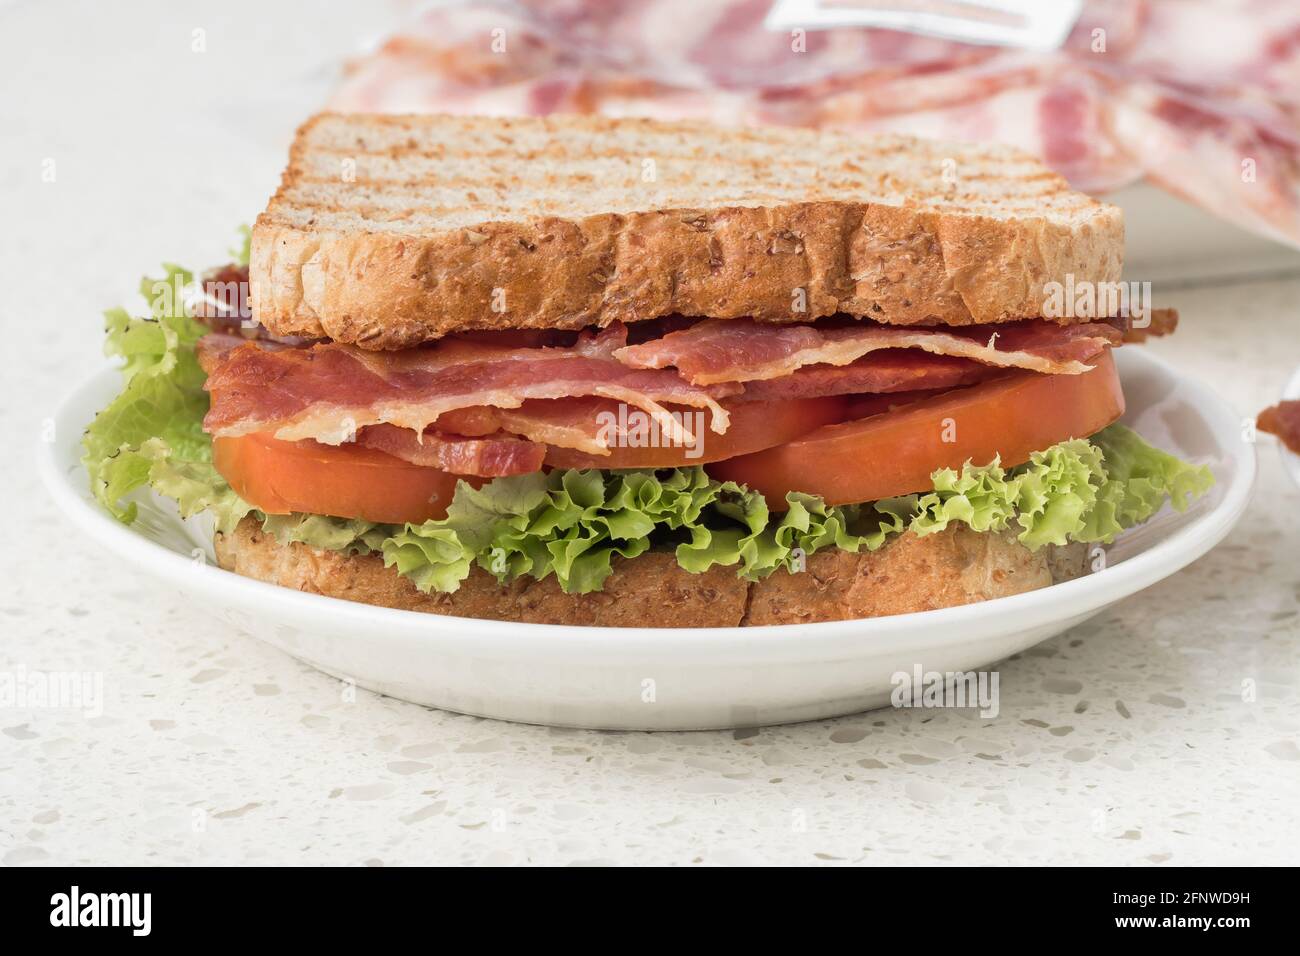 Grilled BLT Sandwich with bacon, tomato, lettuce, and whole wheat bread Stock Photo